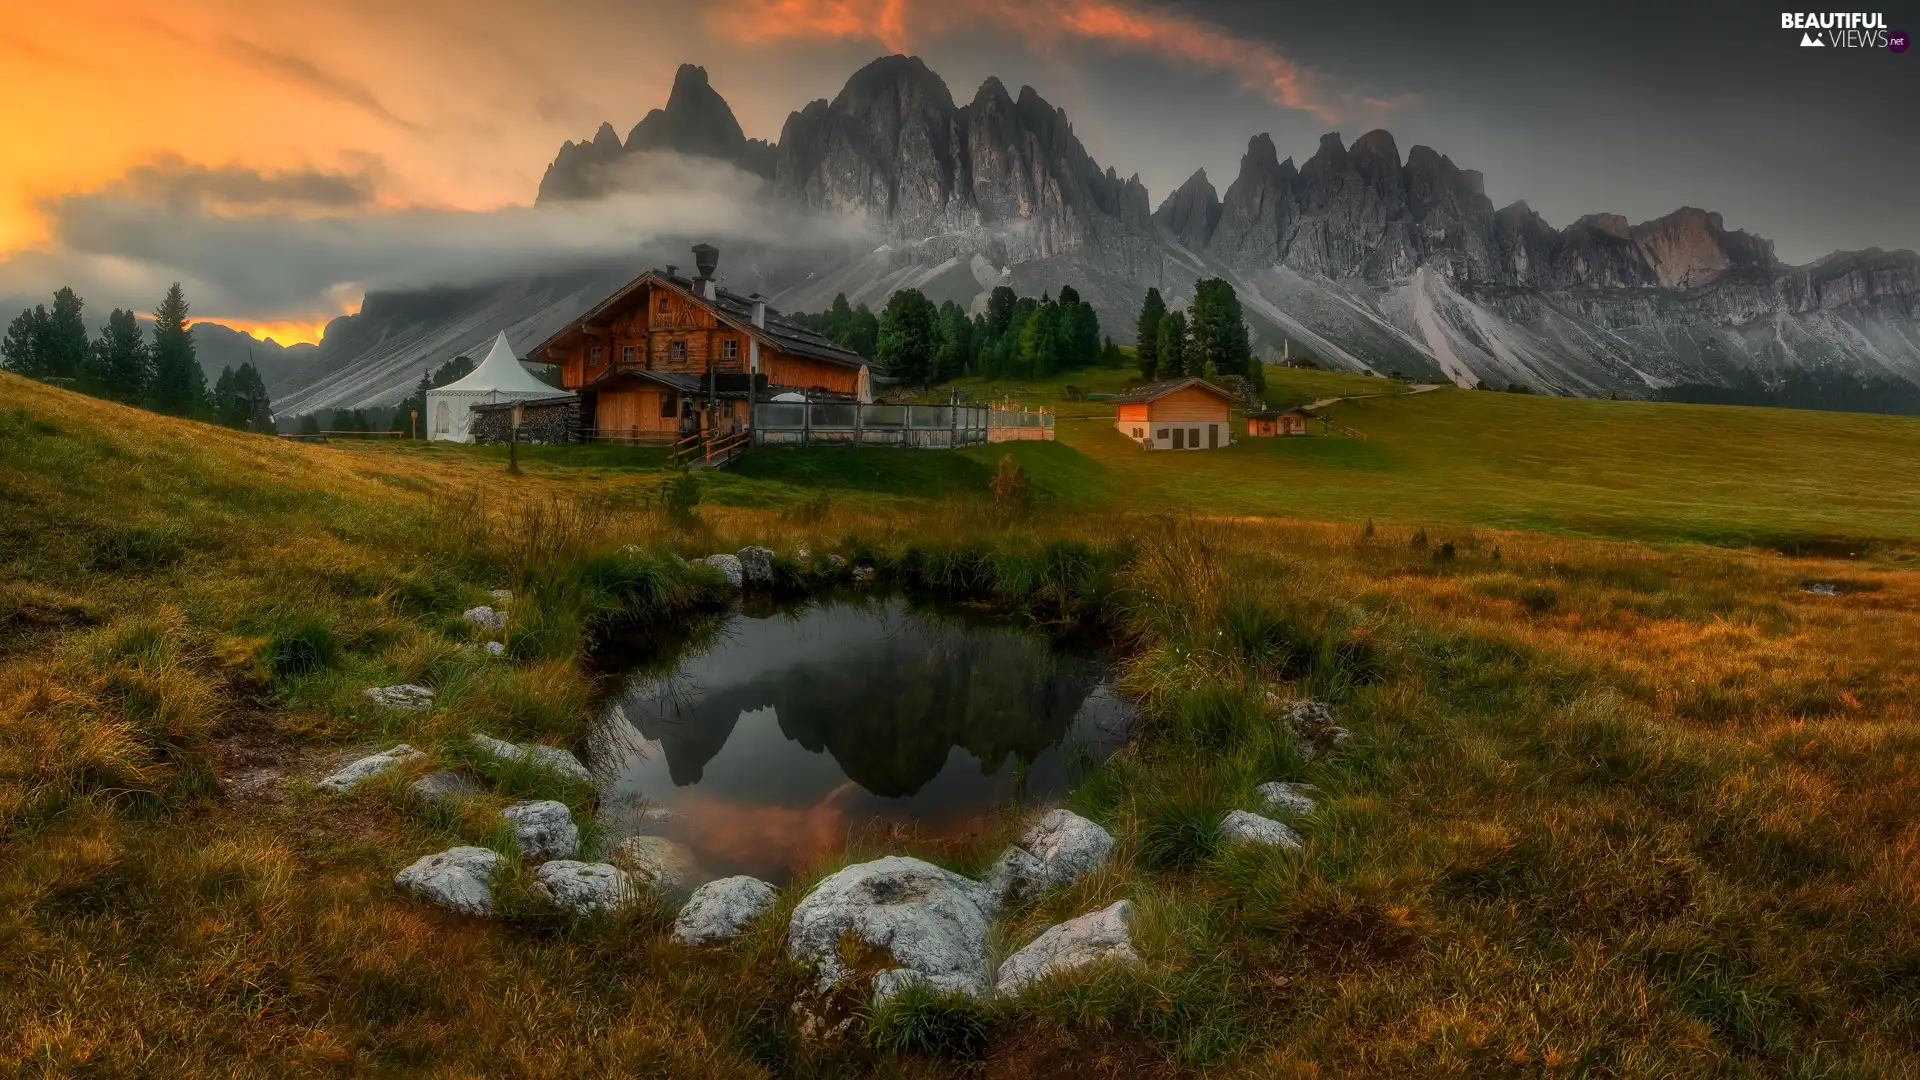 clouds, Dolomites, Mountains, viewes, Houses, Mountains, Puez-Odle nature park, Italy, trees, Pond Water